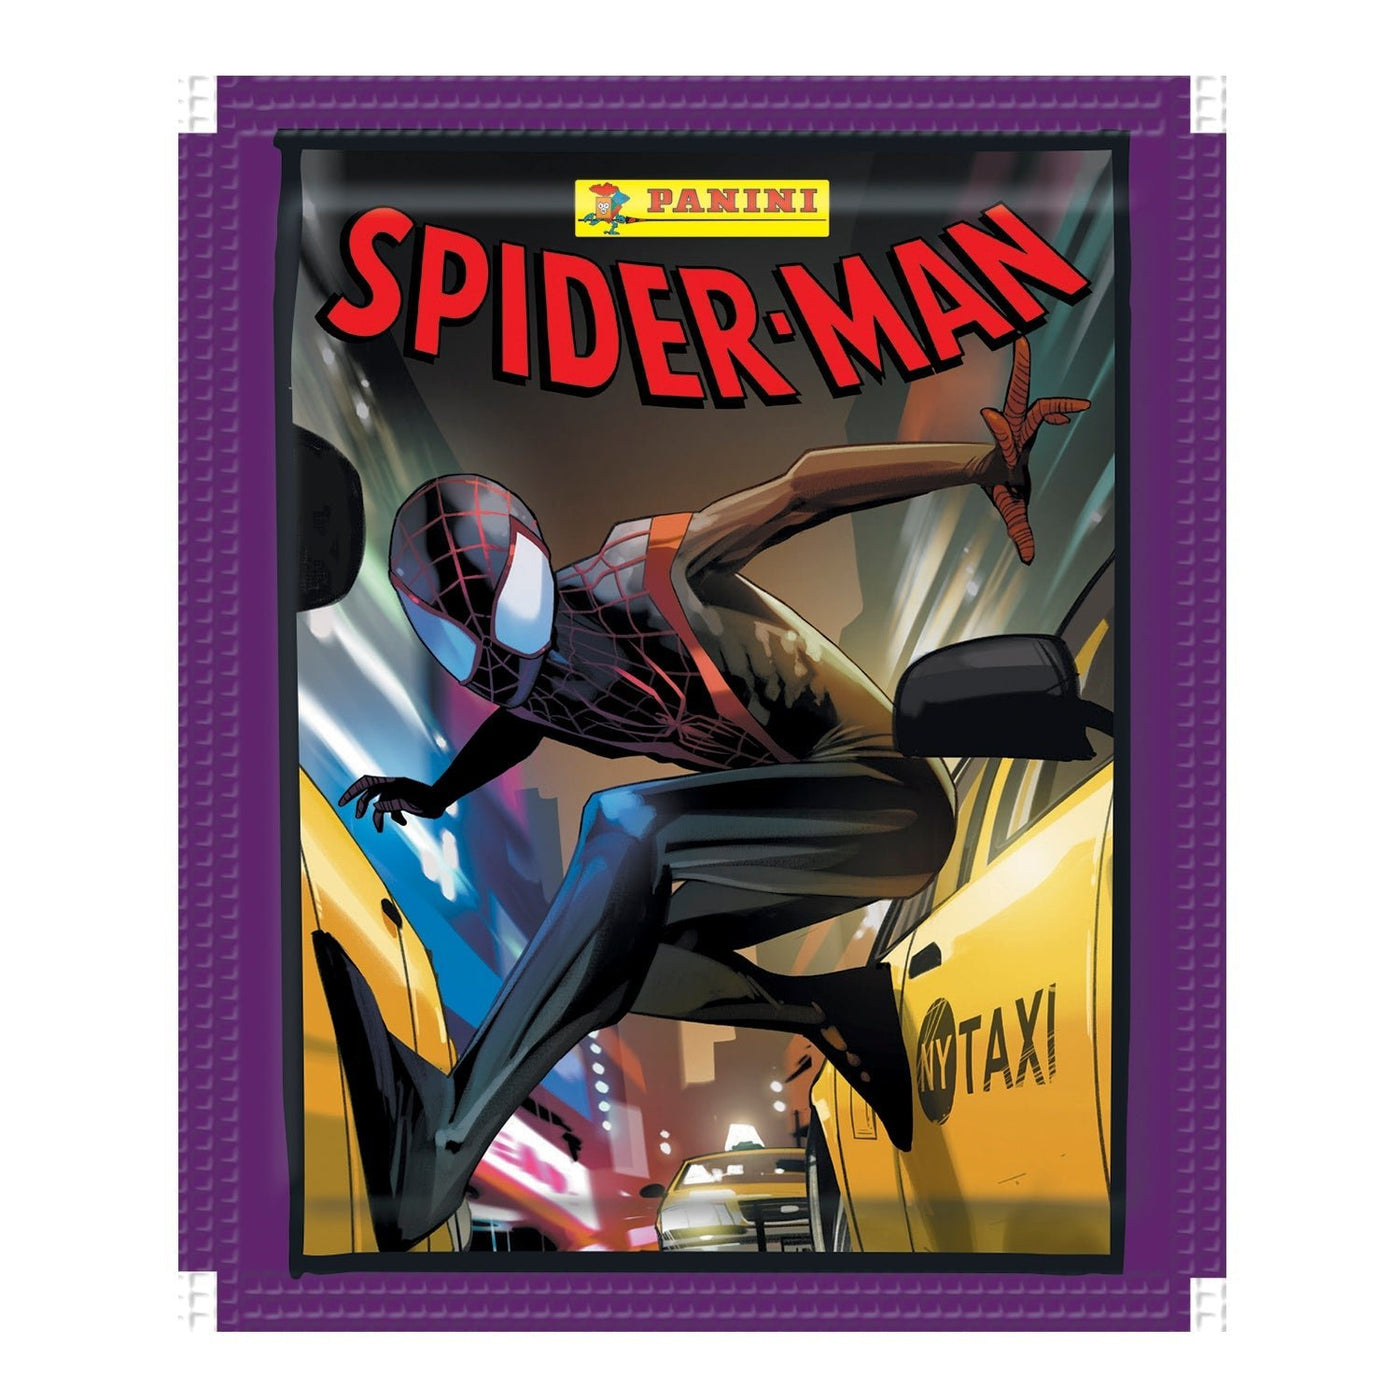 PaniniSpider-Man Spider-Verse Sticker CollectionProduct: PacksSticker CollectionEarthlets